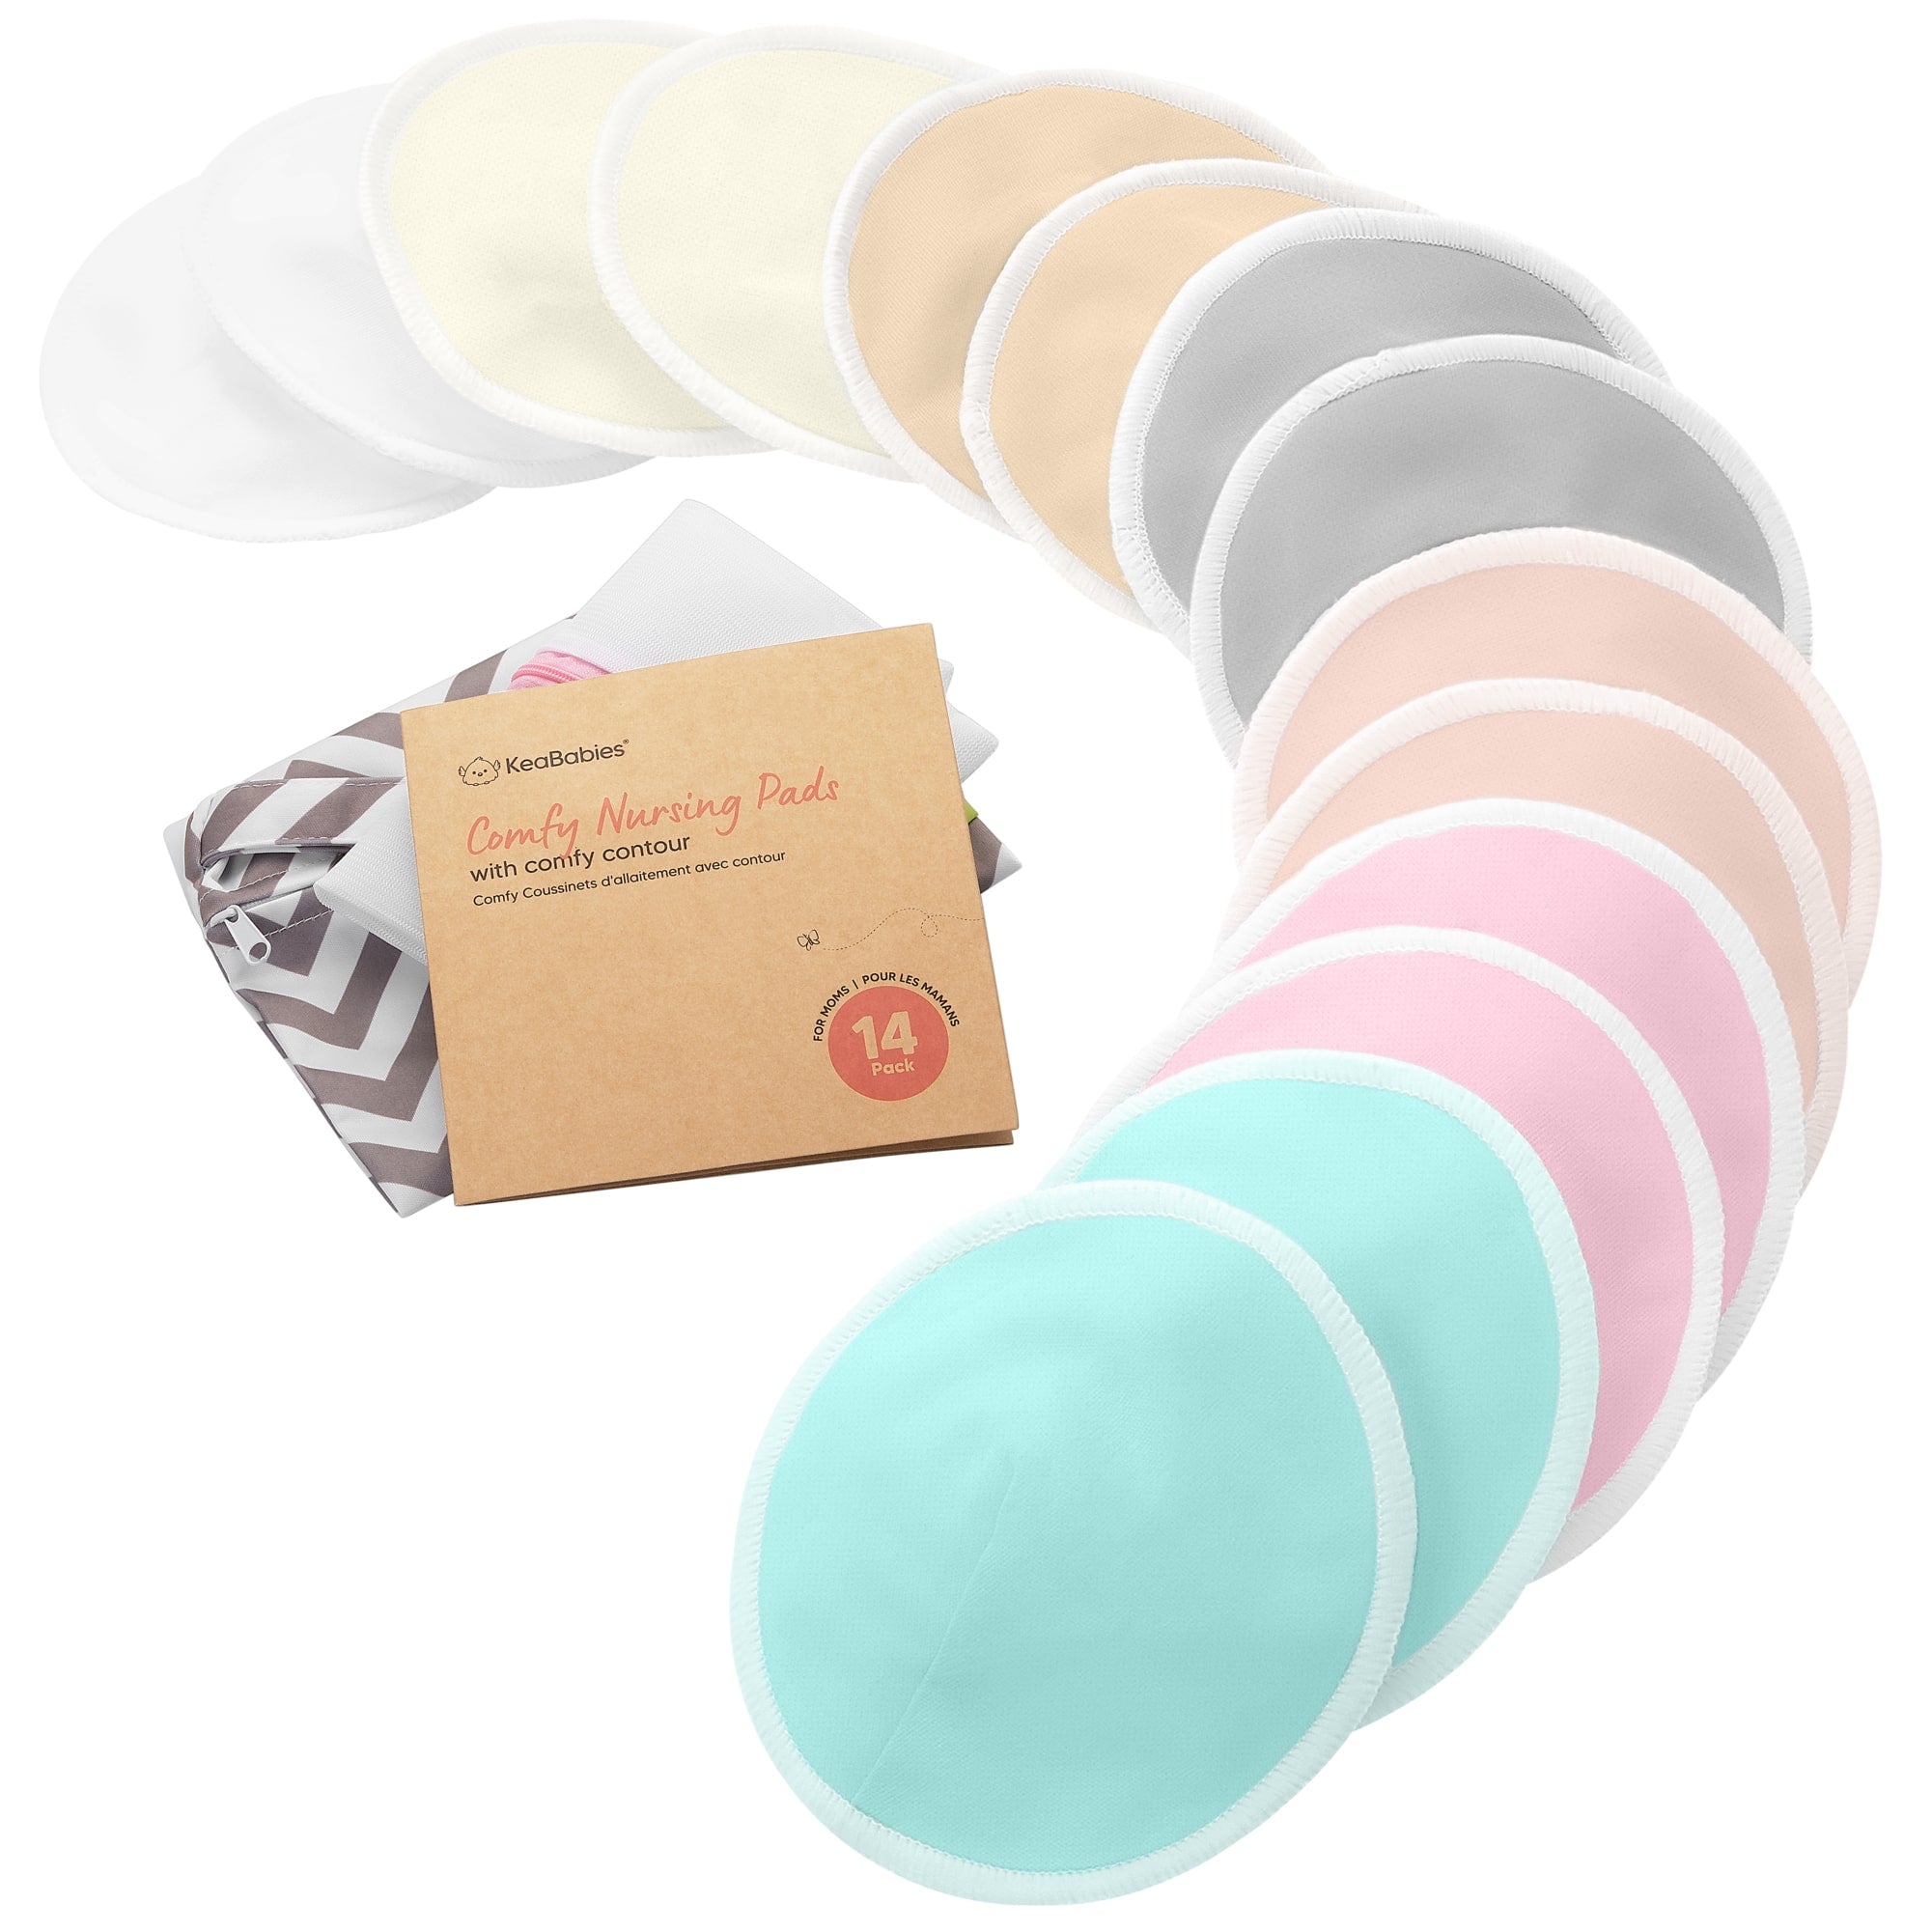 Choosing the Perfect Nursing Pads: Disposable, Reusable or